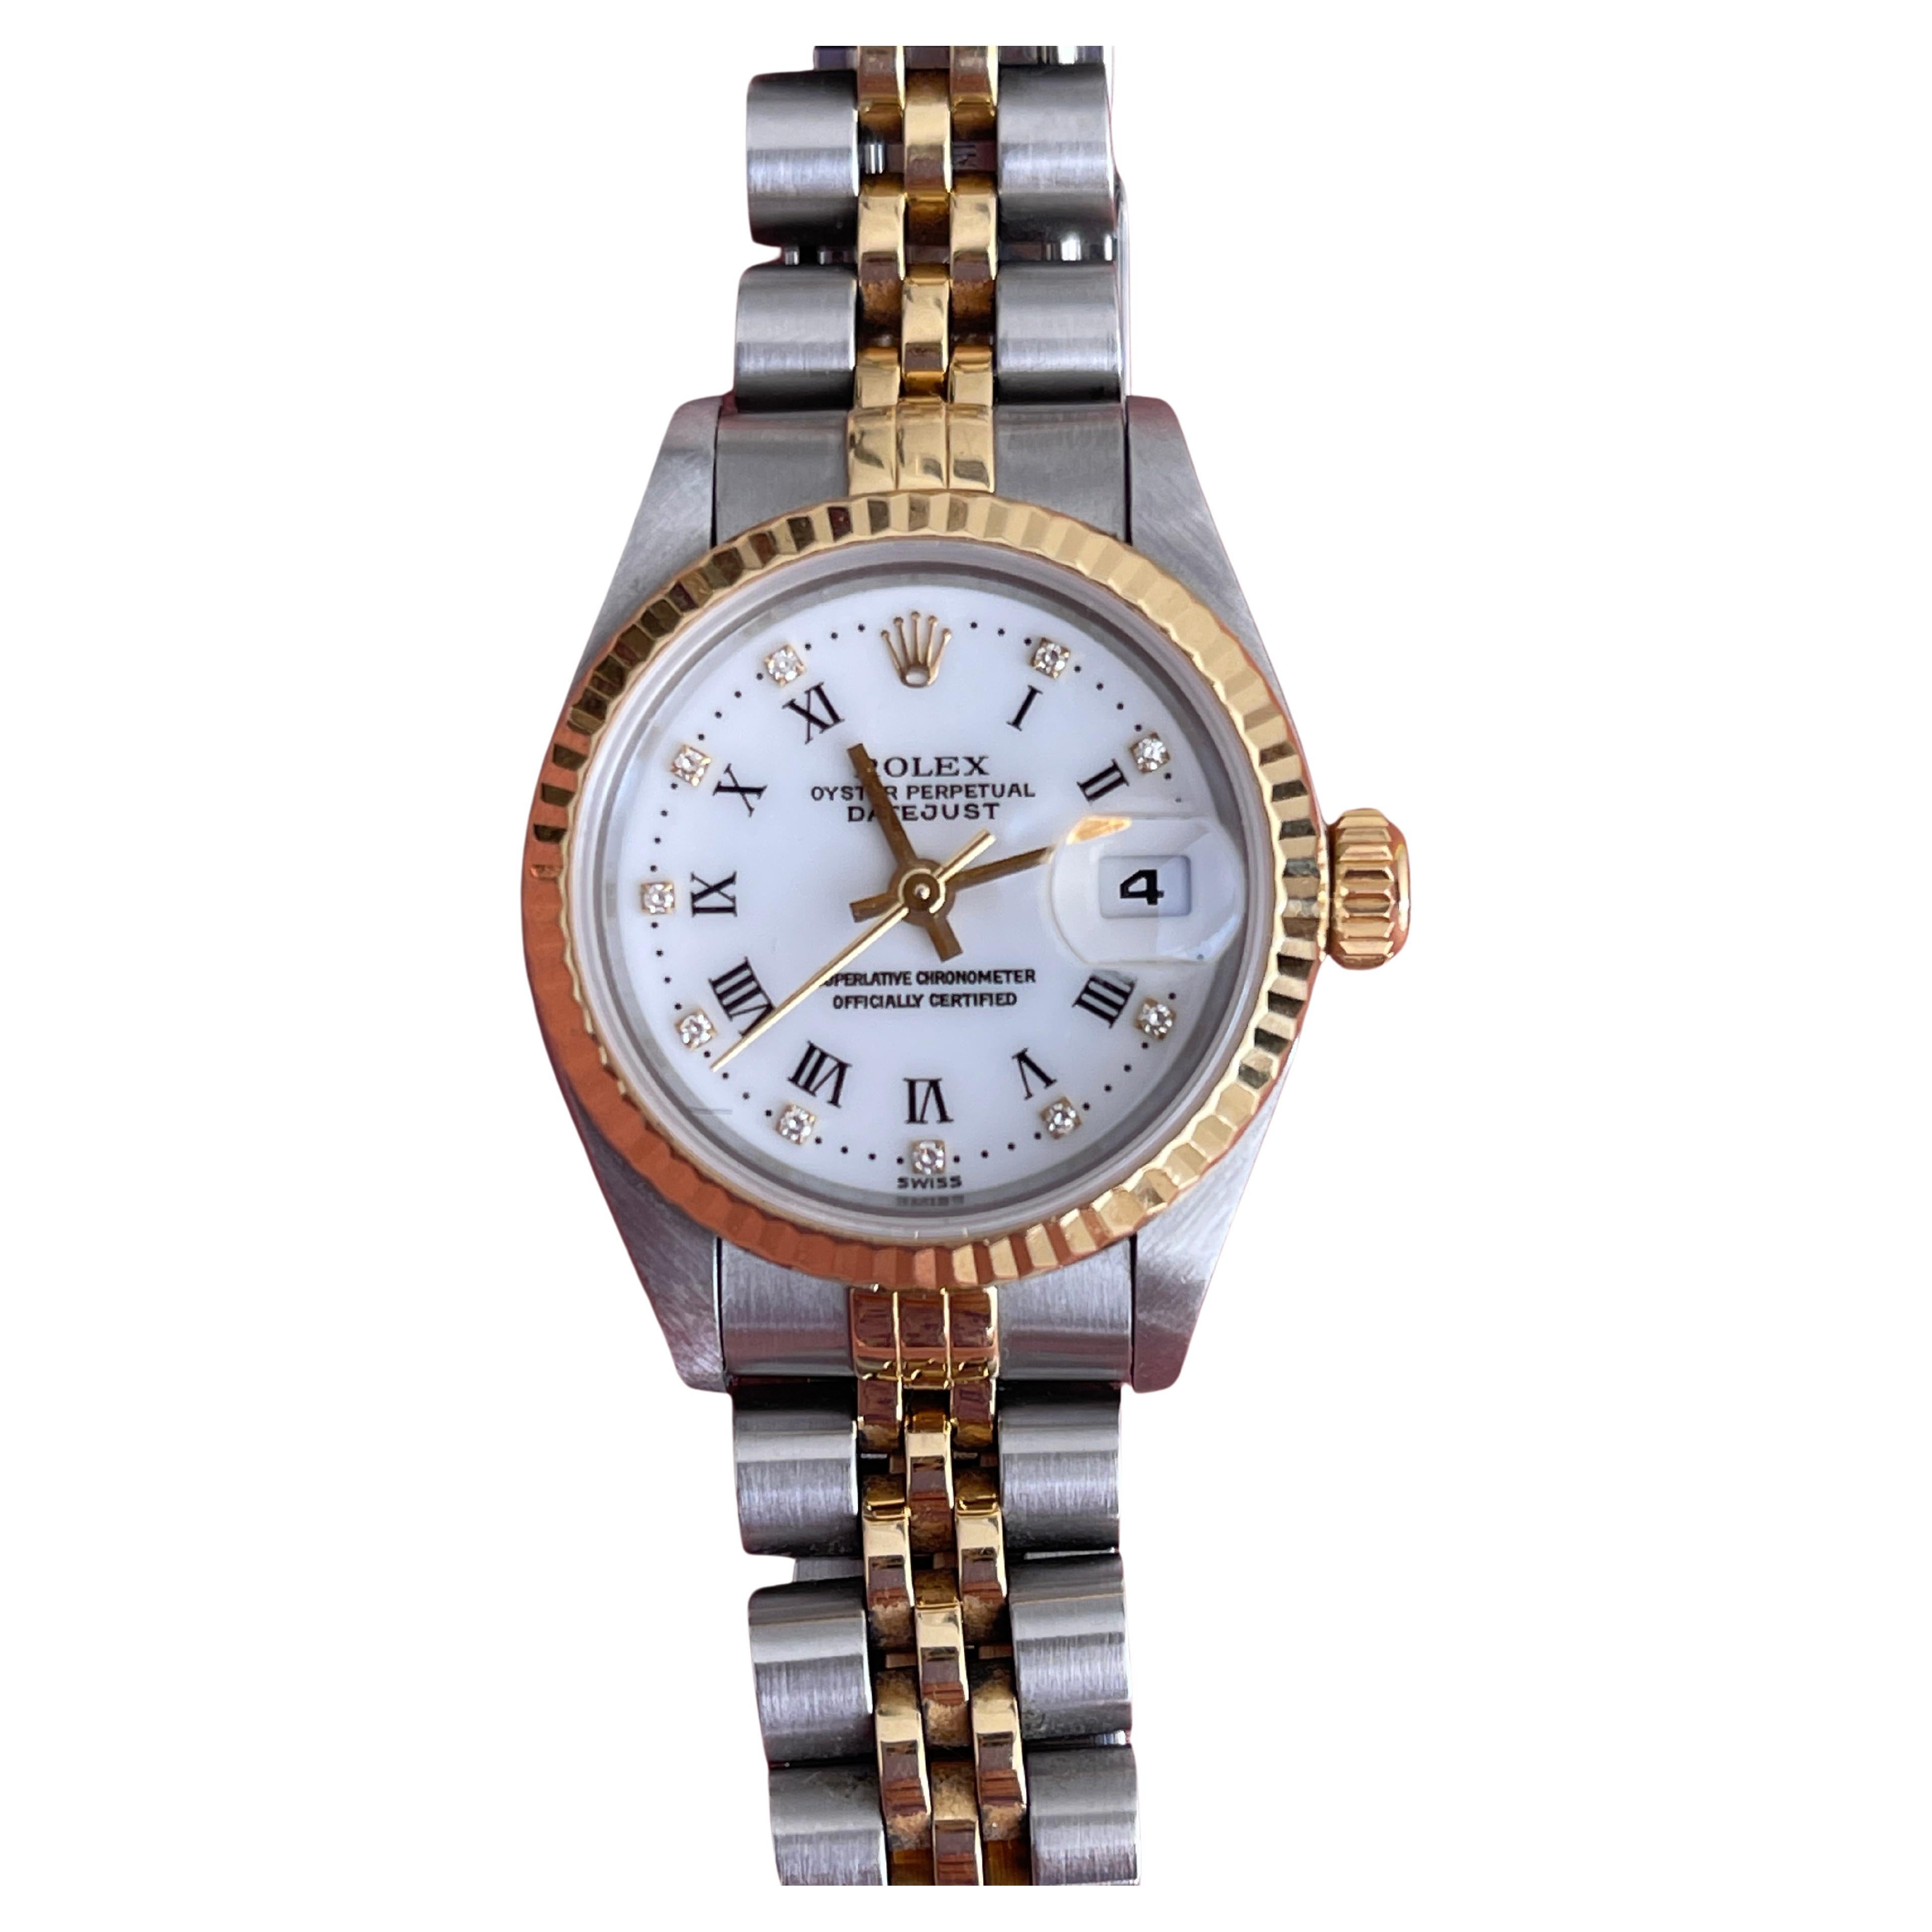 Rolex lady datejust 26mm two tone diamond face For Sale